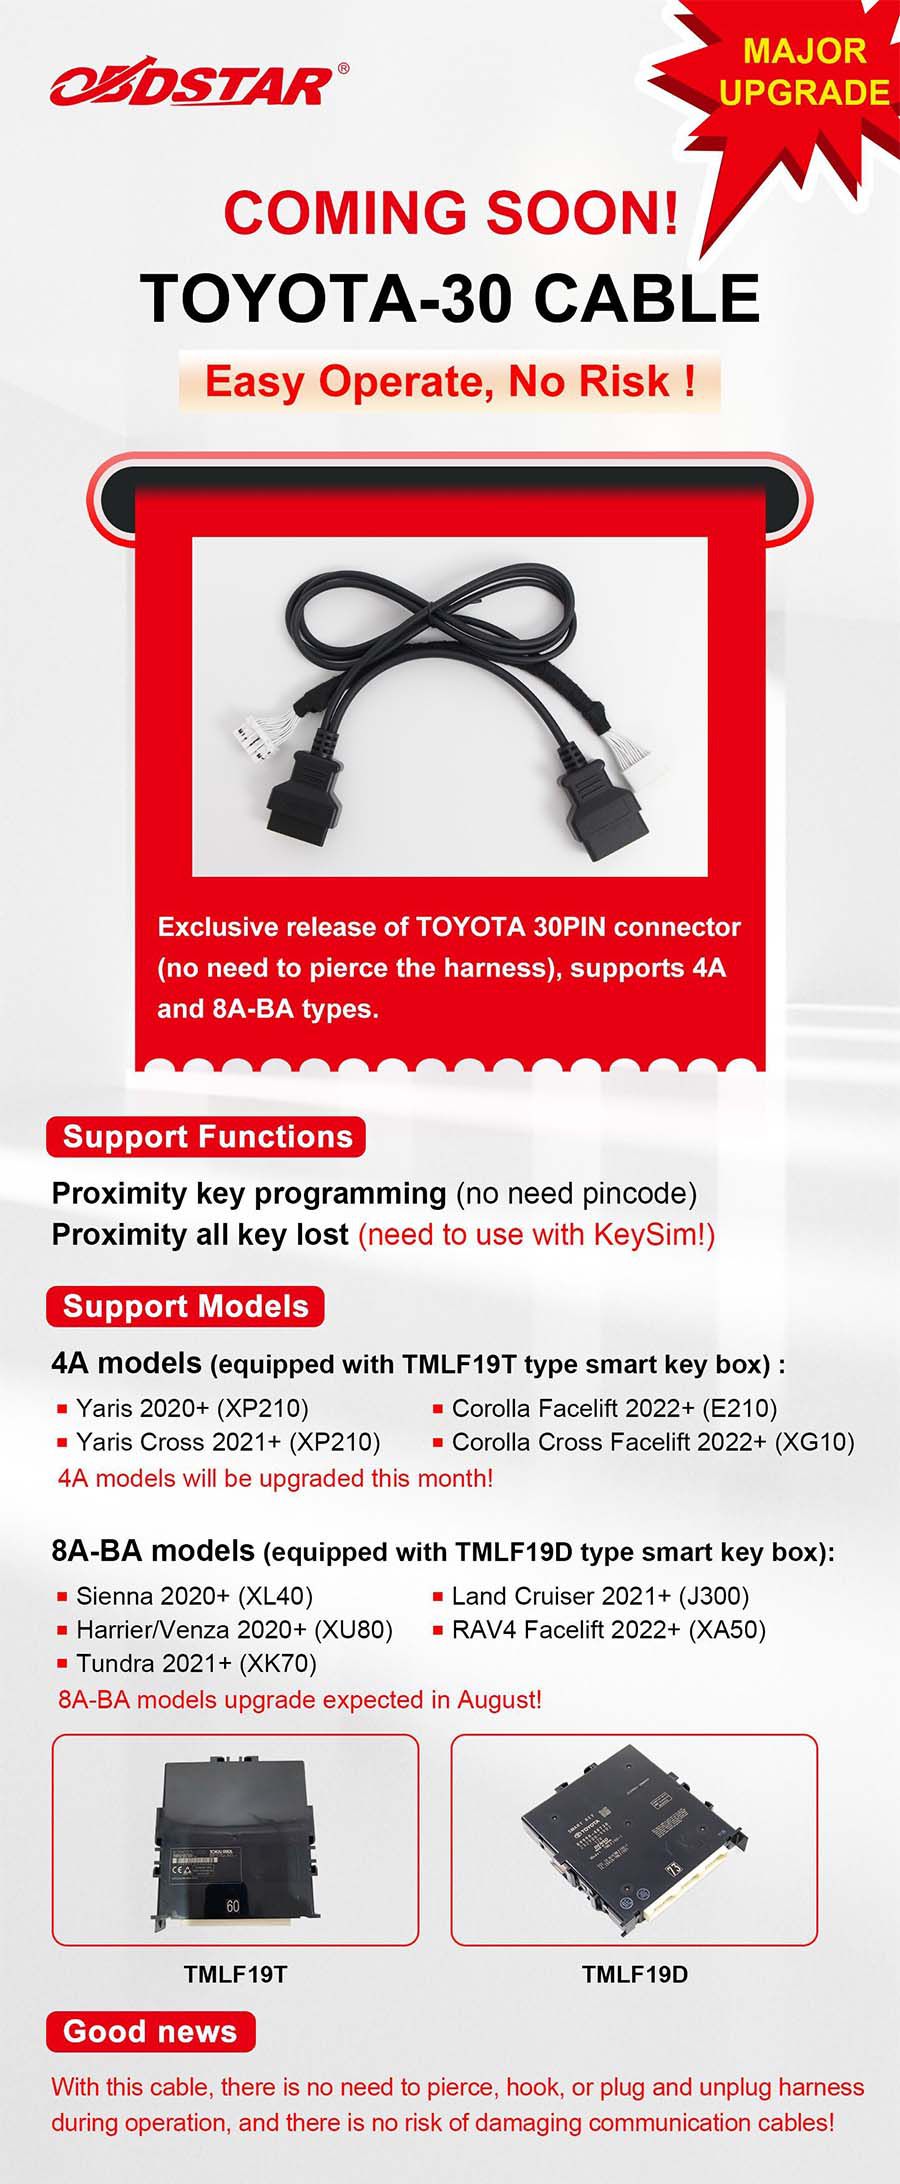 OBDSTAR Toyota-30 Cable Proximity Key Programming All Key Lost No Need to Pierce the Harness for X300DP Plus/ X300Pro 4